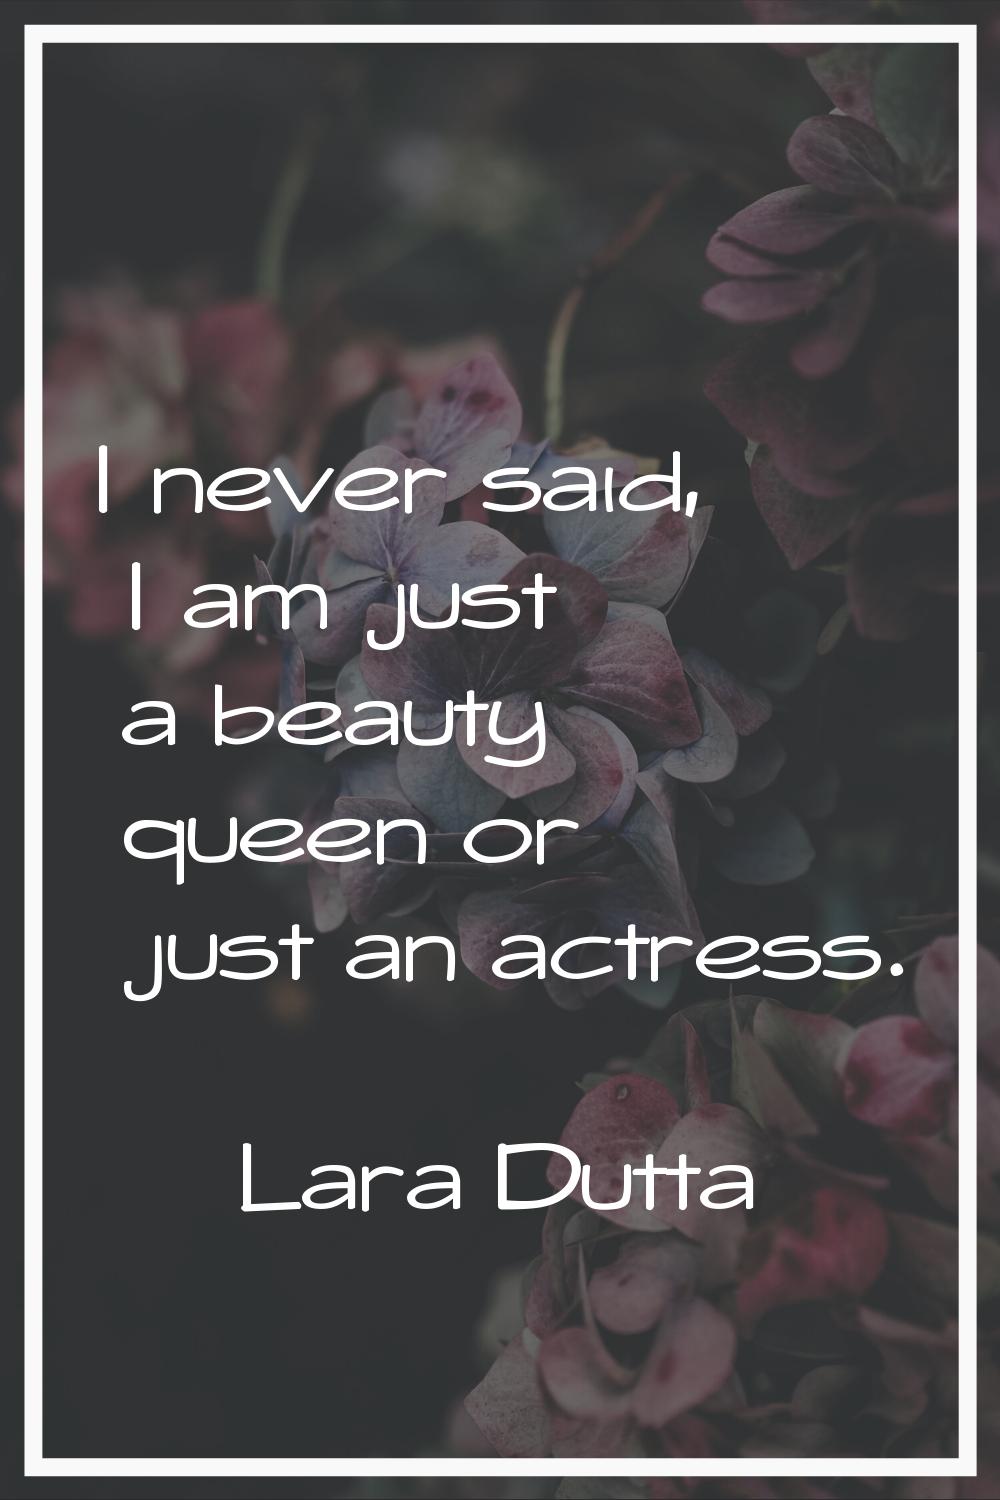 I never said, I am just a beauty queen or just an actress.